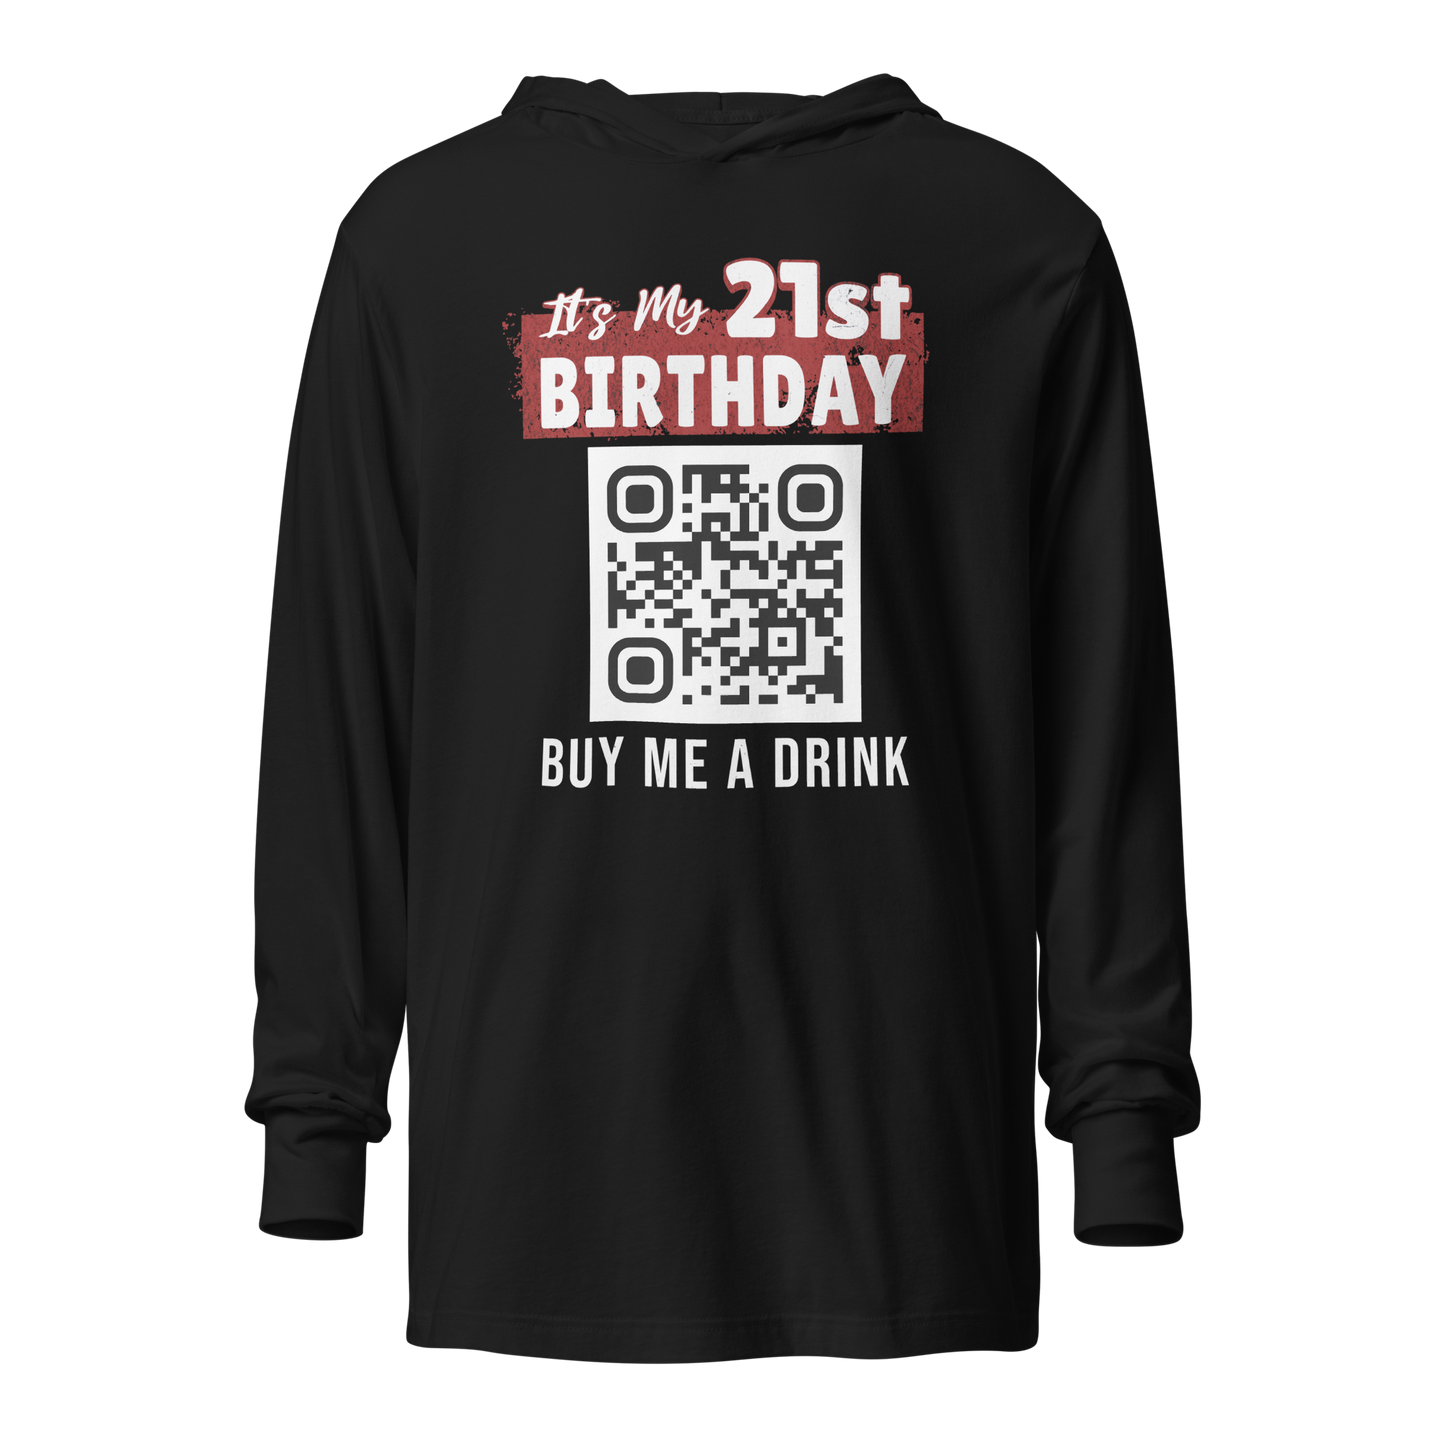 It's My 21st Birthday Buy Me A Drink Lightweight Hoodie - Personalizable